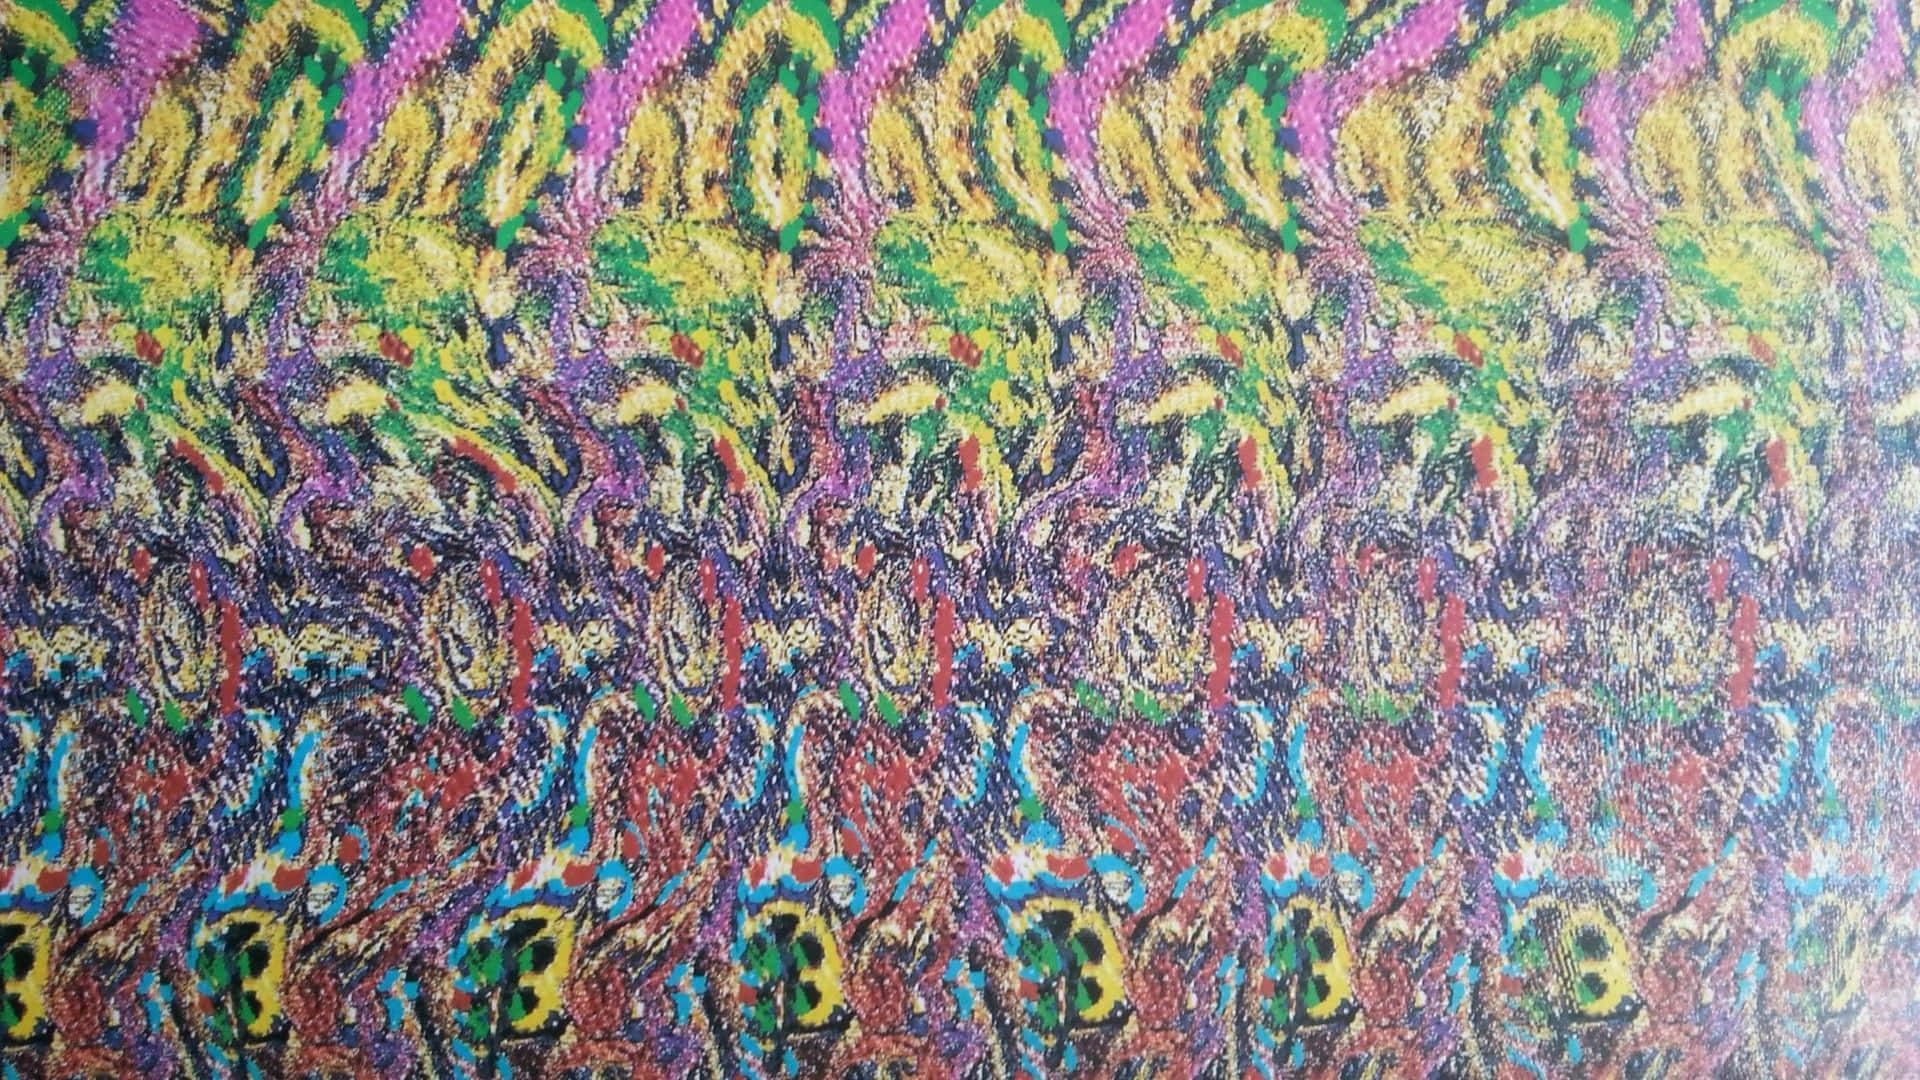 "Stare intently into the colorful world of Magic Eye!"